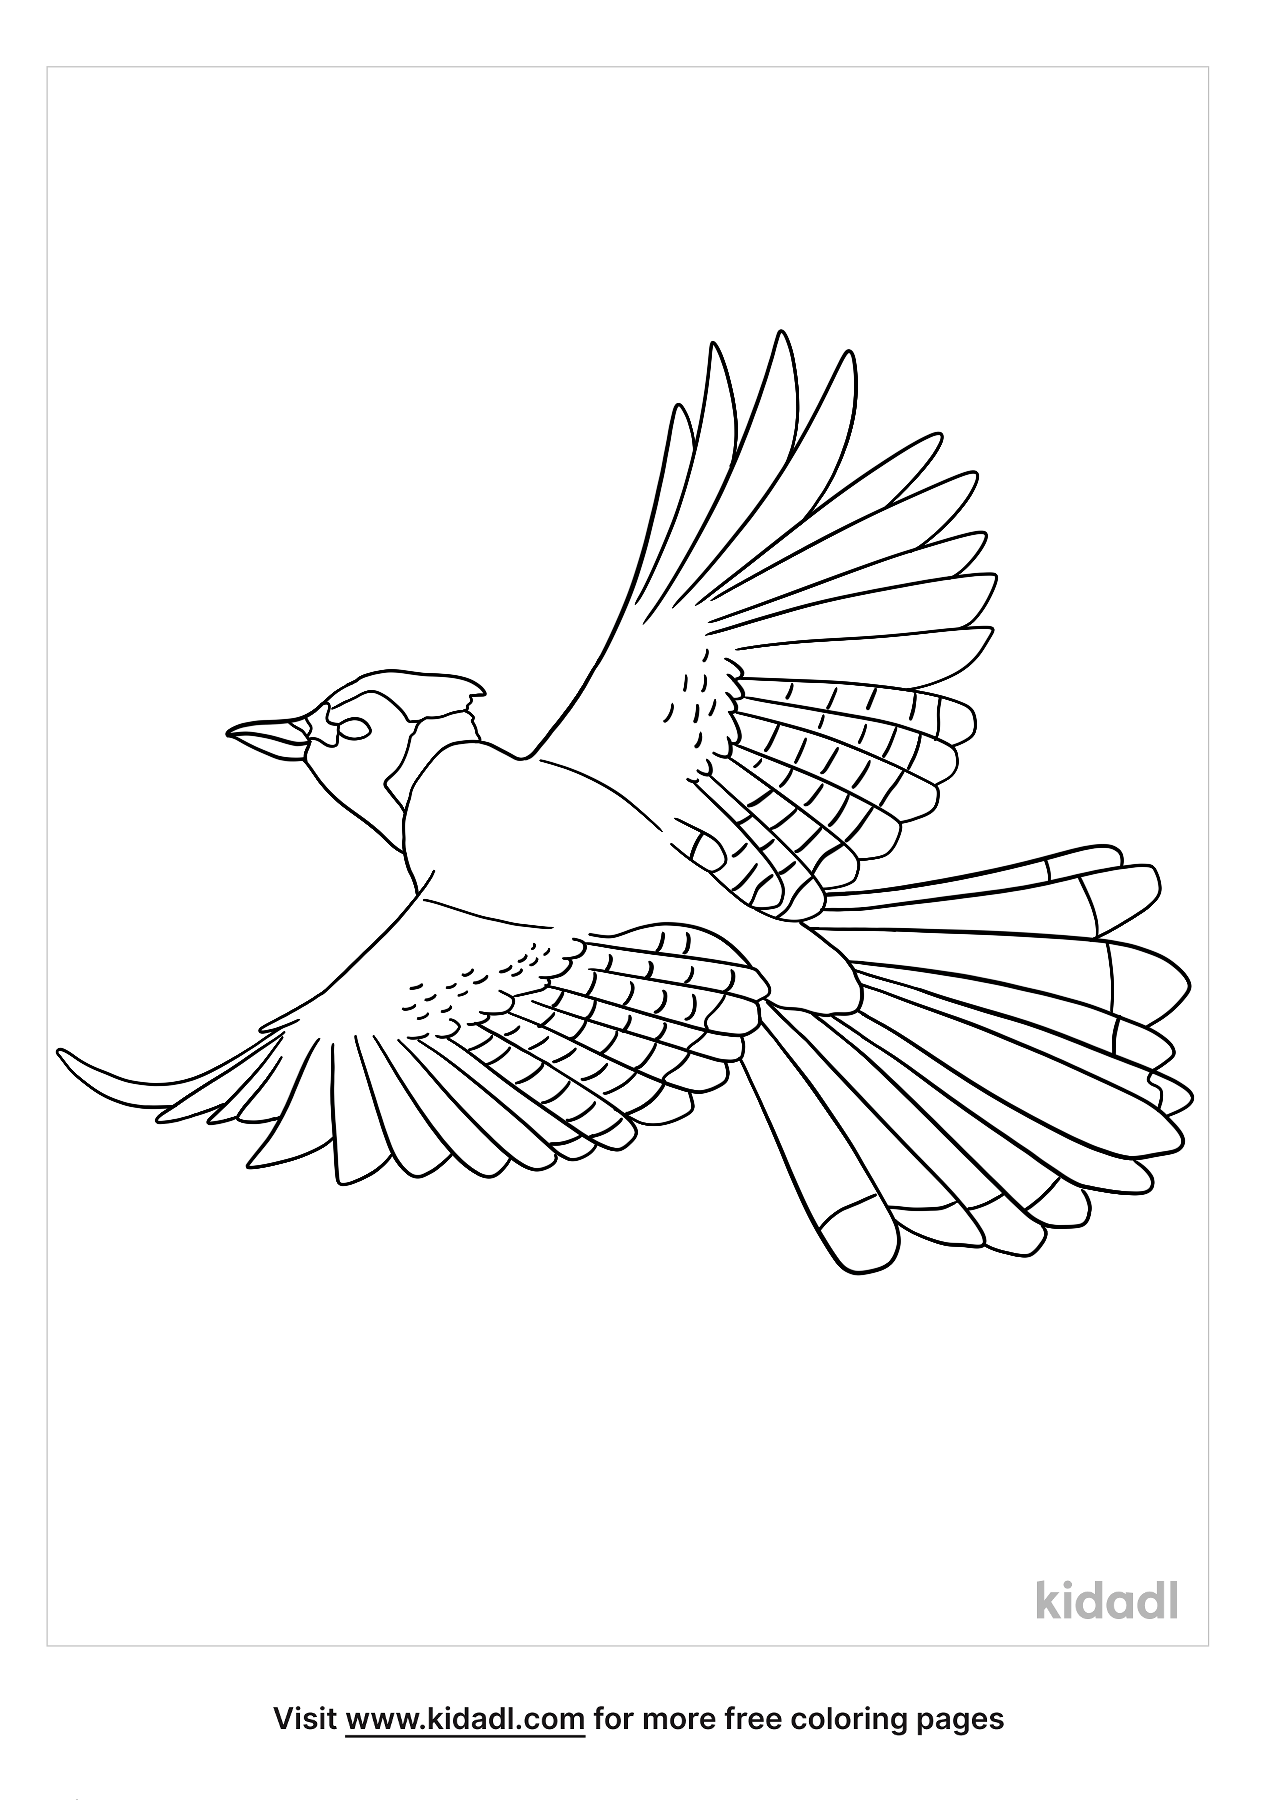 Flying Blue Jay Coloring Pages | Free Birds Coloring Pages | Kidadl